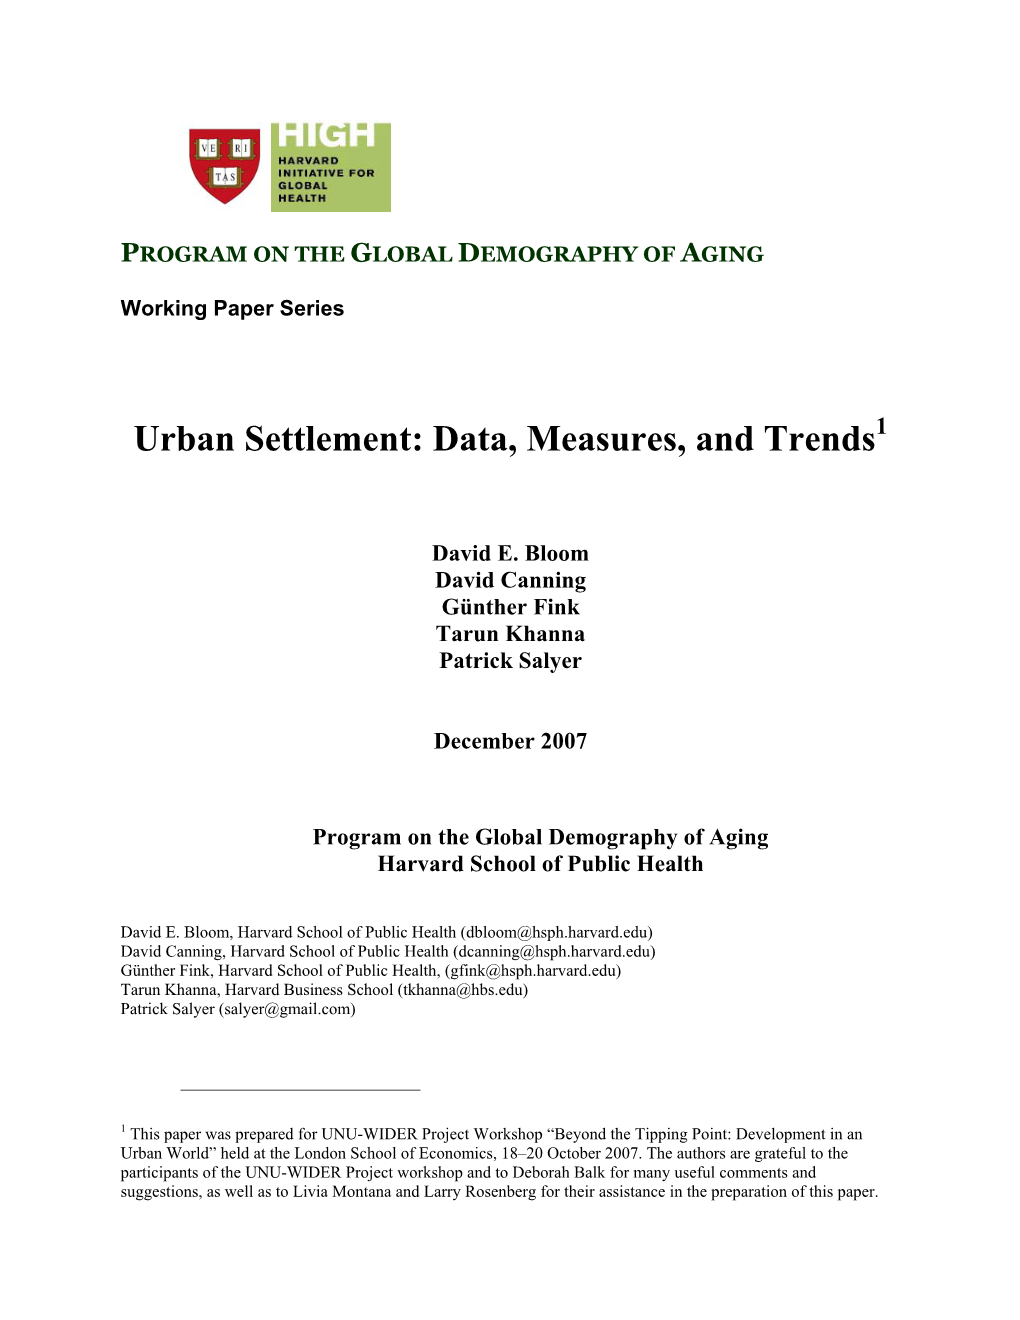 Urban Settlement: Data, Measures, and Trends1